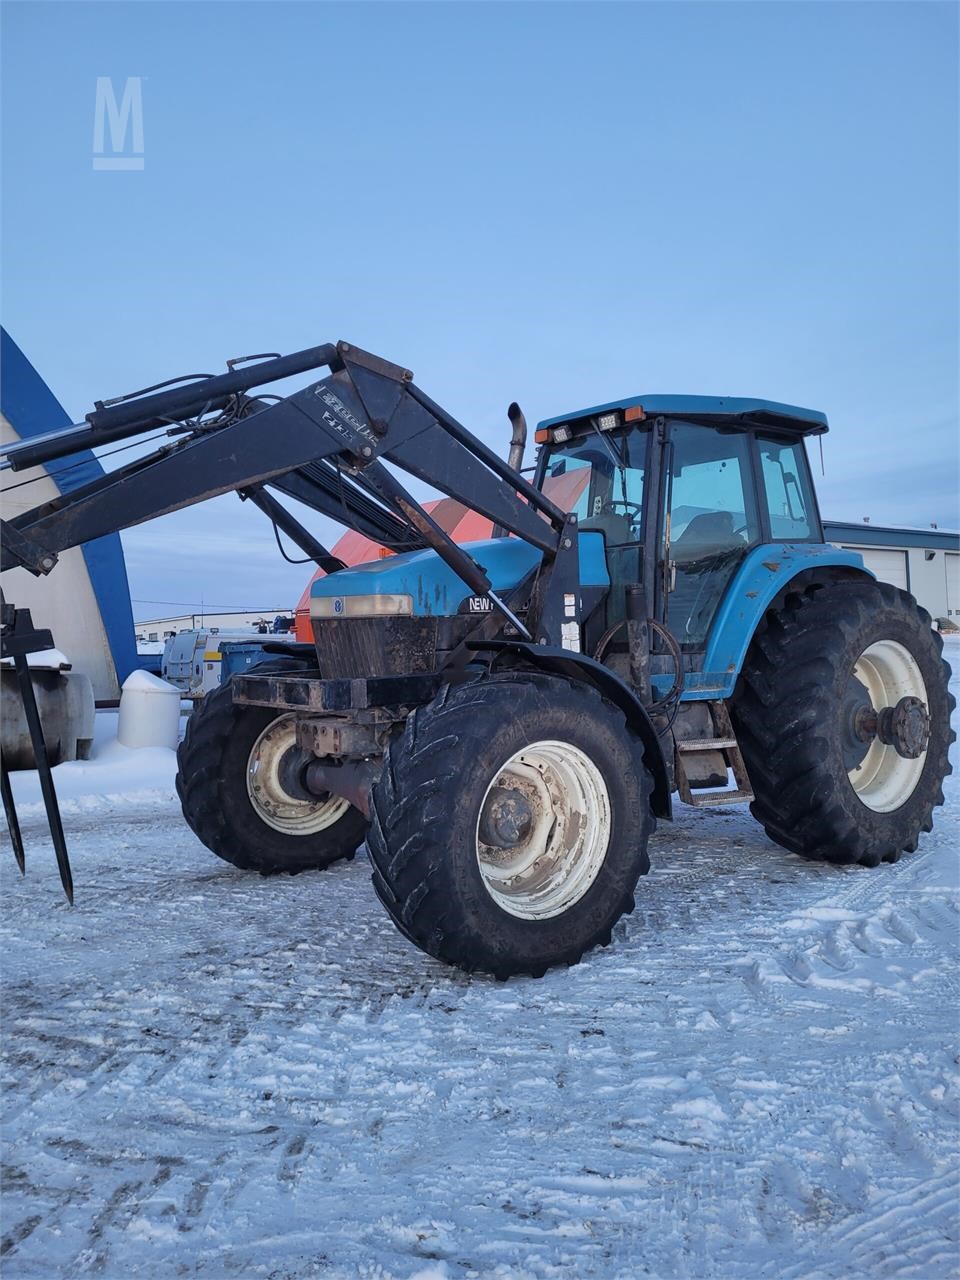 NEW HOLLAND 8970 For Sale - 10 Listings | MarketBook.ca - Page 1 of 1